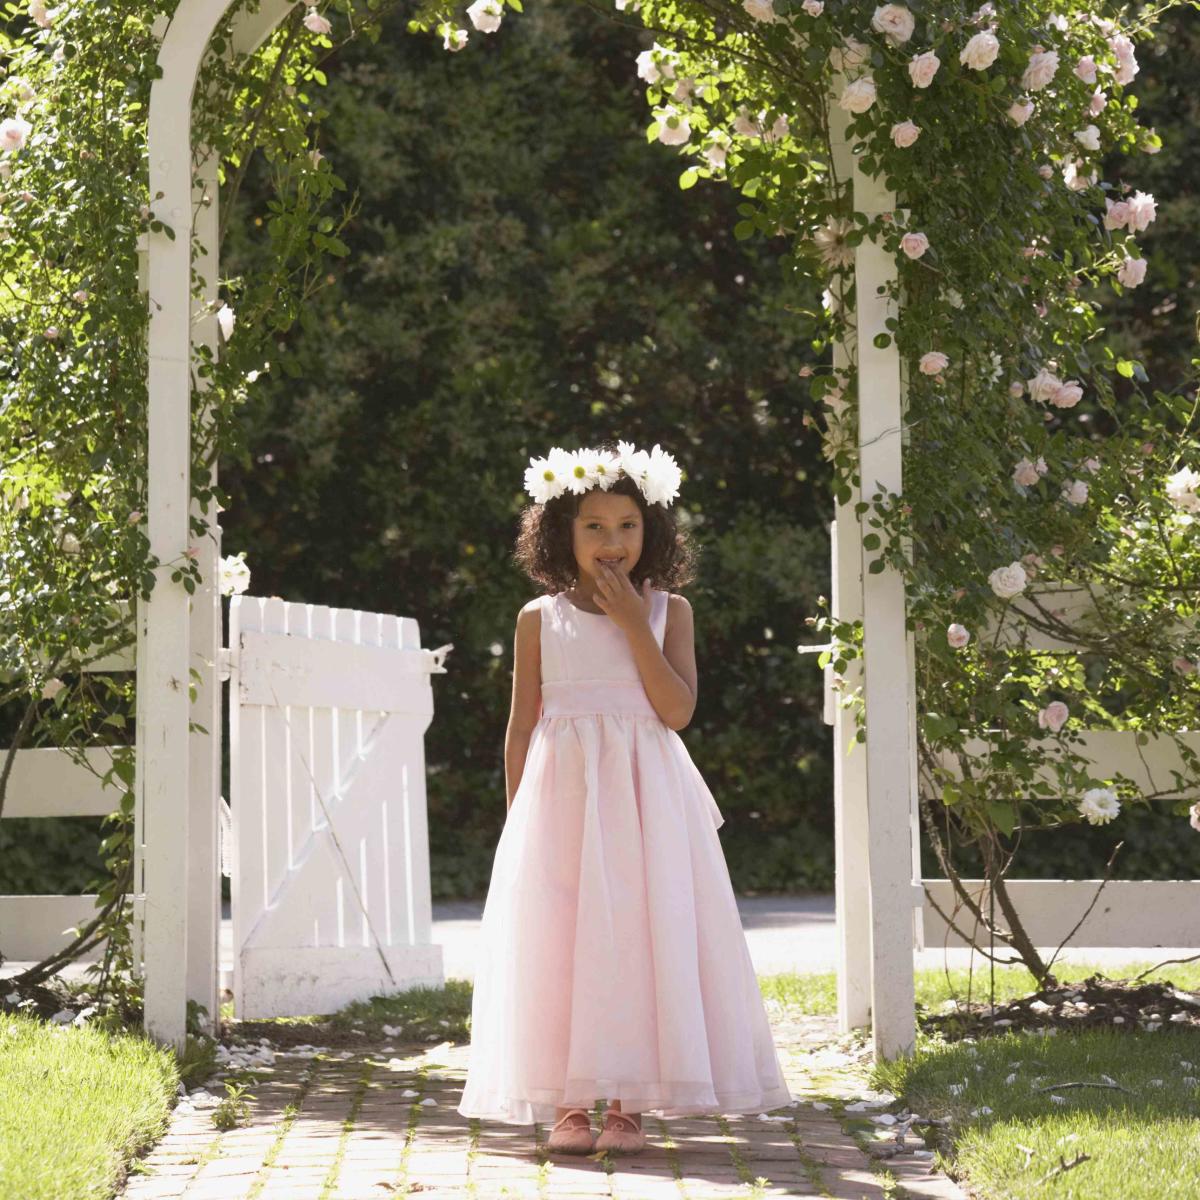 Ever-Pretty Stylish Lace High Low A-Line Flower Girl Dress